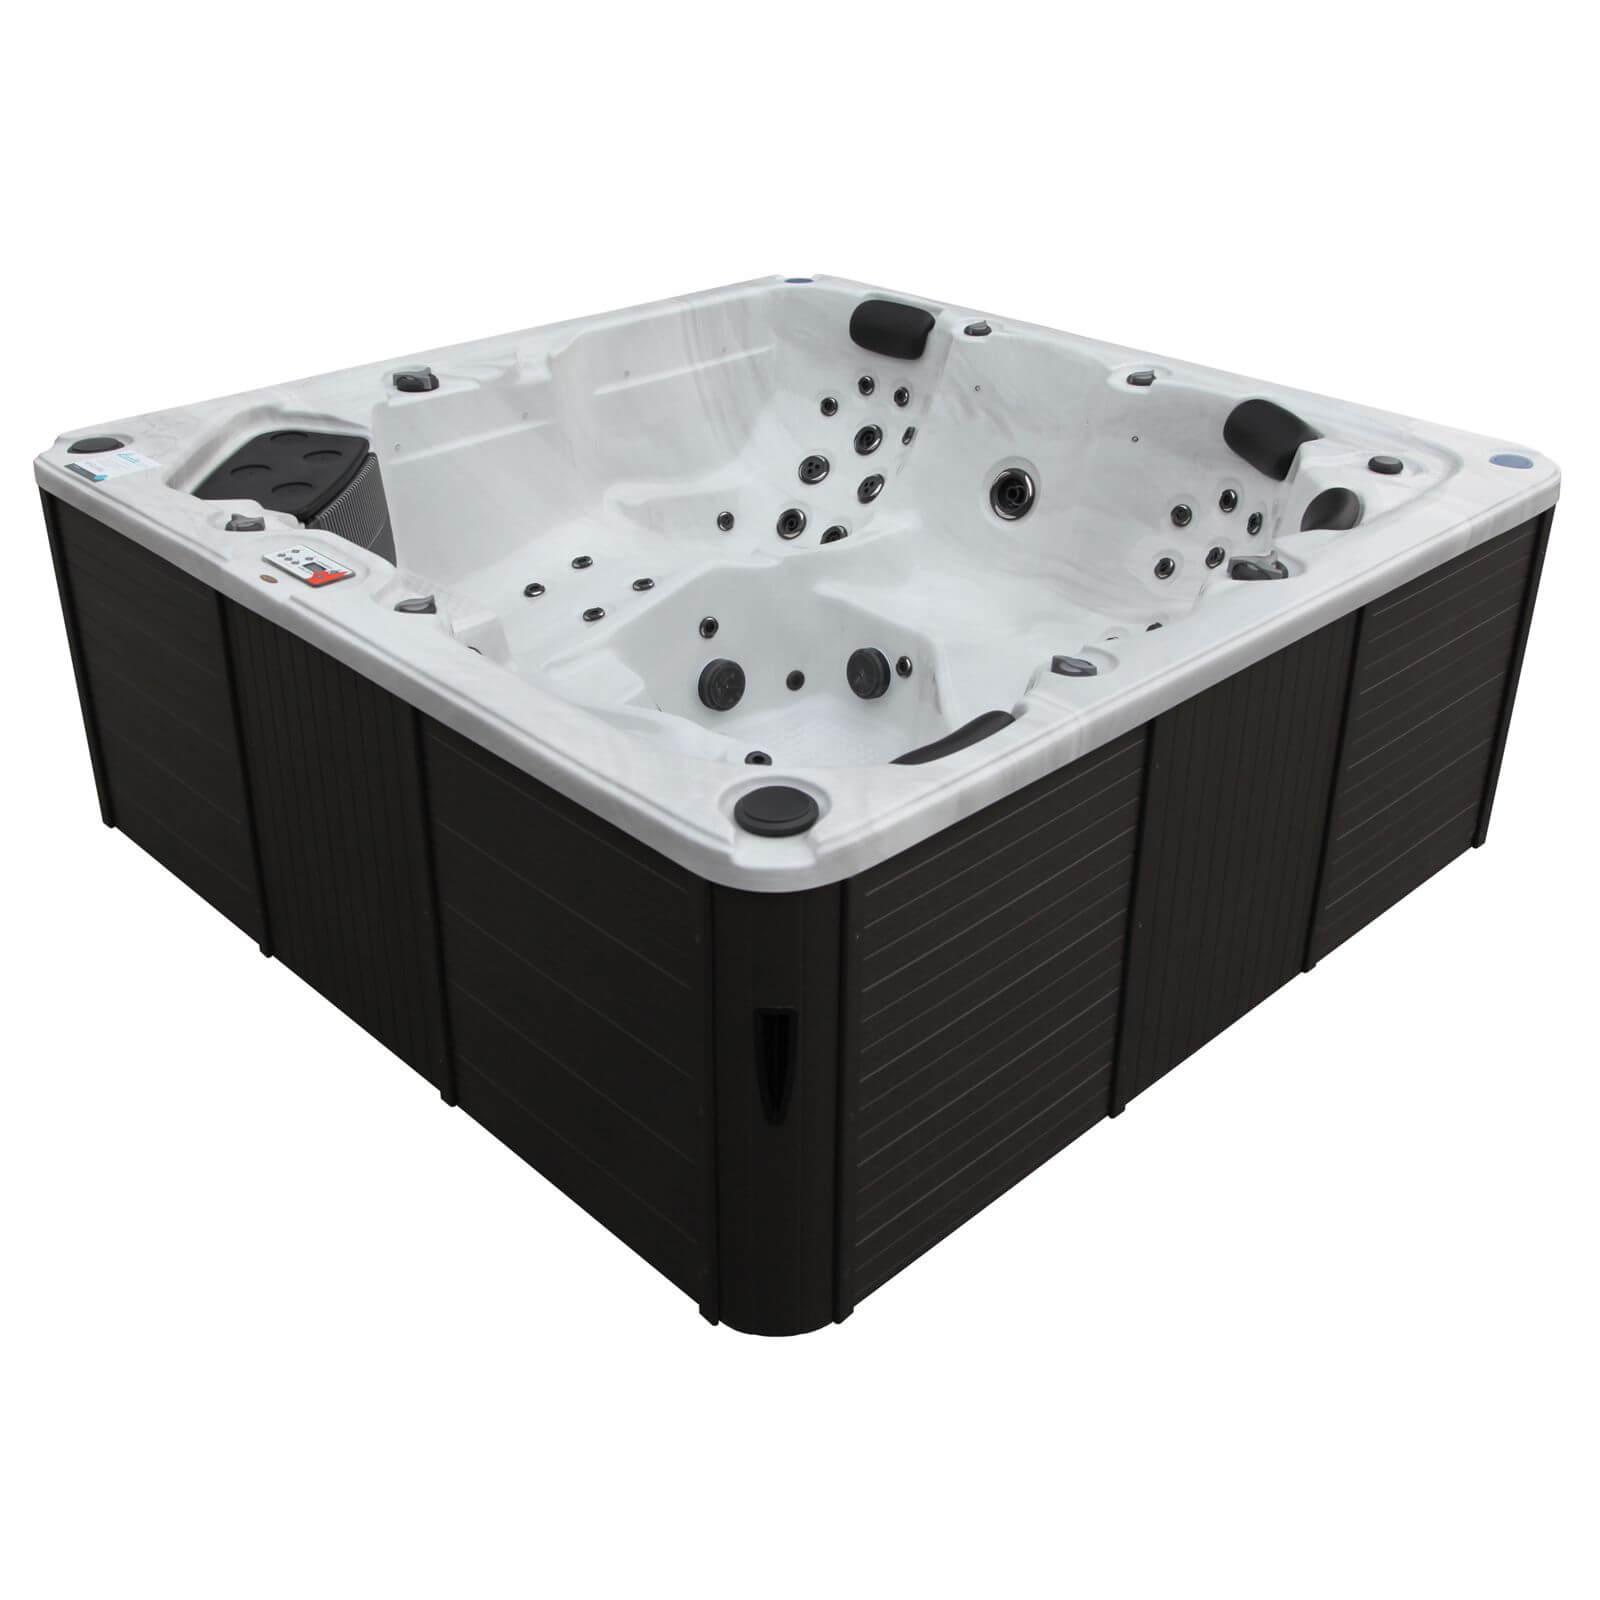 Canadian Spa Vancouver 6 Person Hot Tub (Includes Free Delivery and Installation)